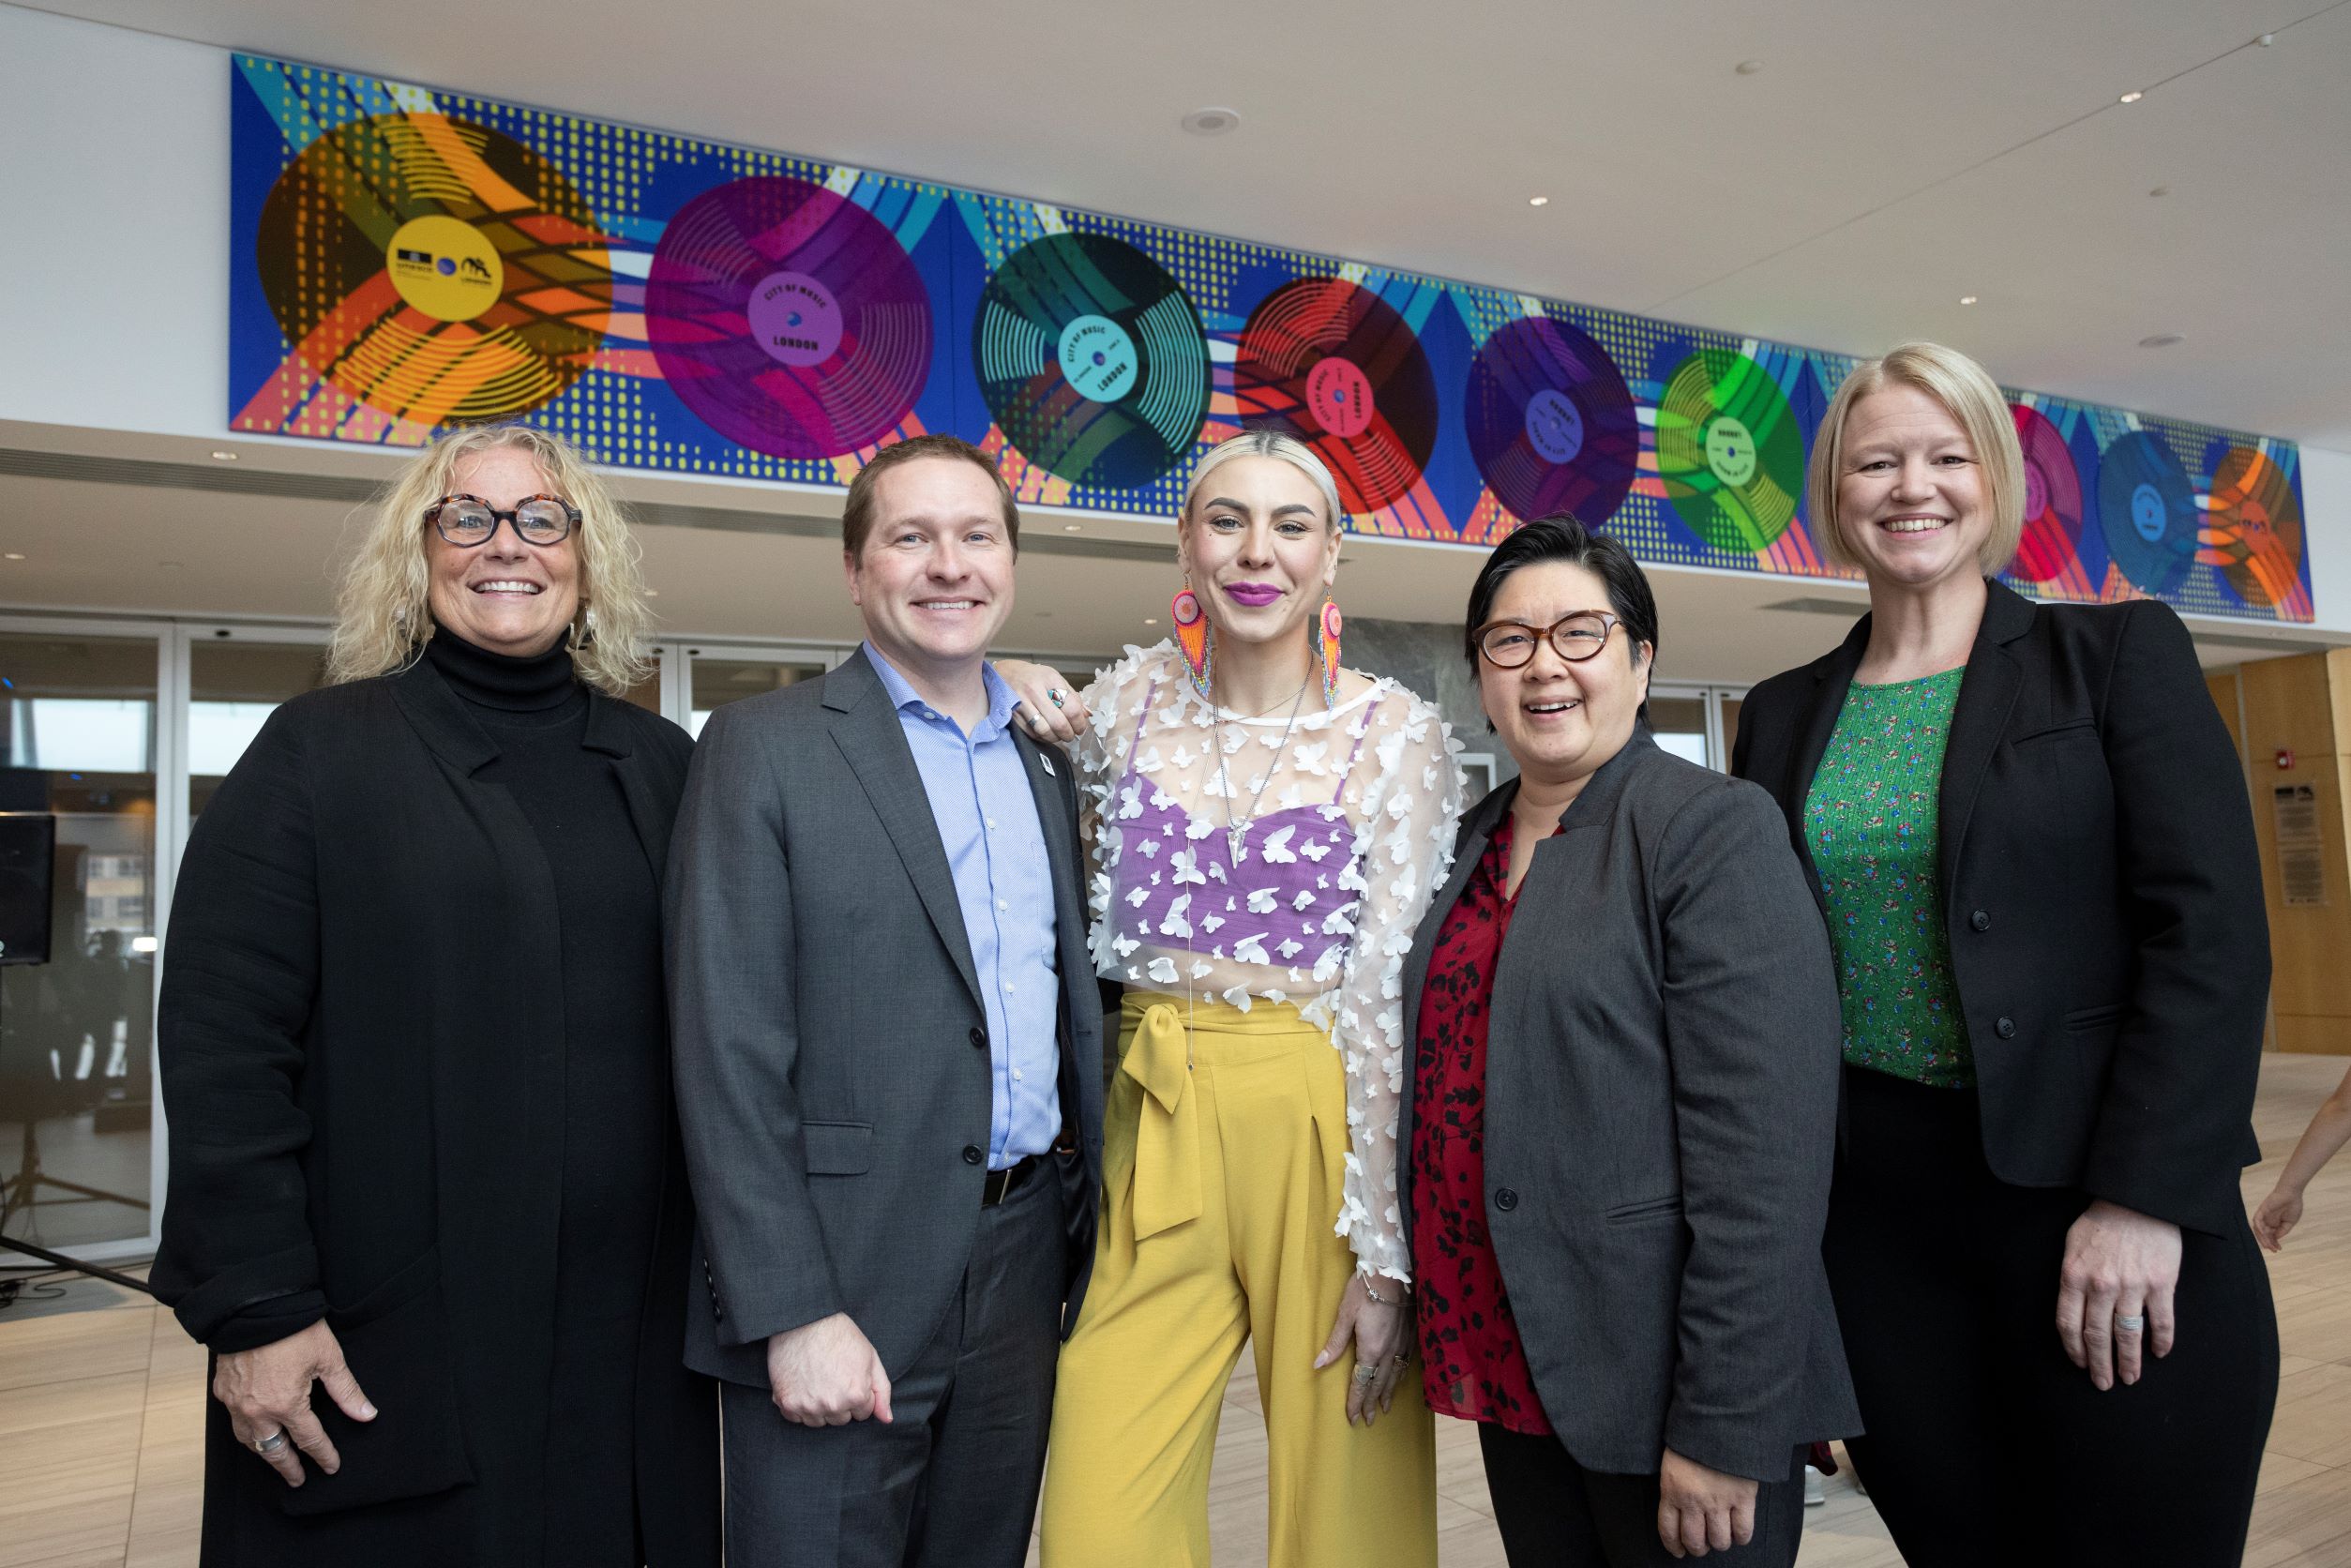 From left to right, Cheryl Smith, Deputy City Manager of Neighbourhood and Community-Wide Services at the City of London; Mayor Josh Morgan; local artist Tova Hasiwar; Janet Loo, Board of Directors’ Vice President at the London Arts Council; and Jennifer Diplock, Board of Directors’ Chair at RBC Place London celebrate the unveiling of the new mural. 